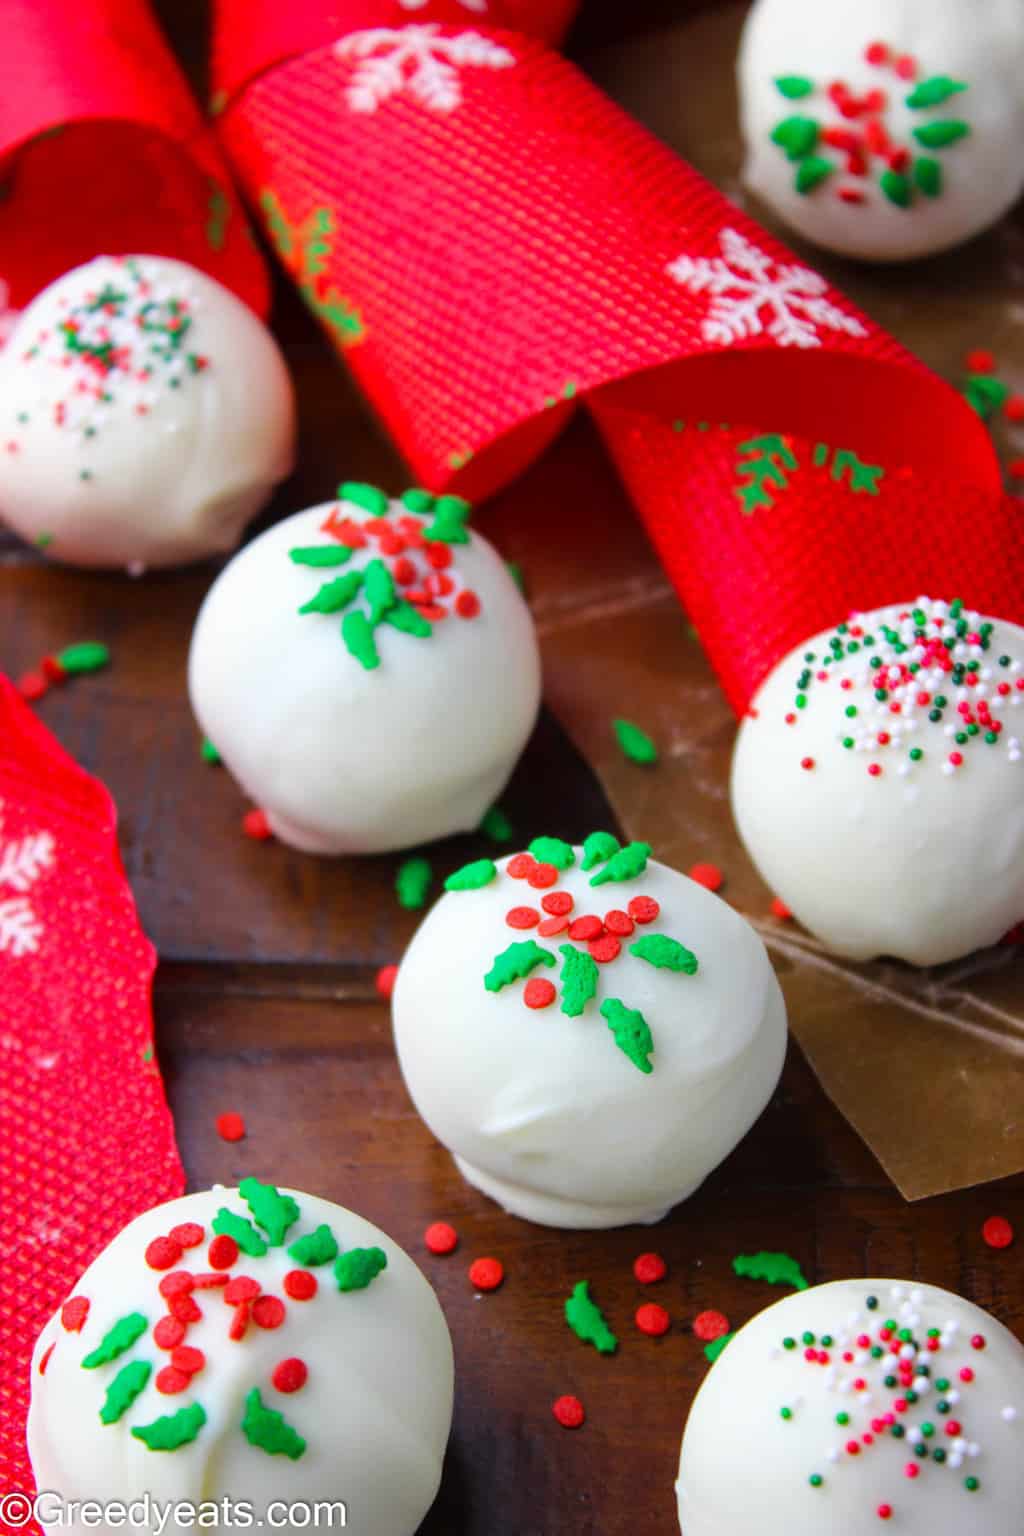 Christmas Sugar Cookie Truffles made with 3 simple ingredients and is a no bake recipe.